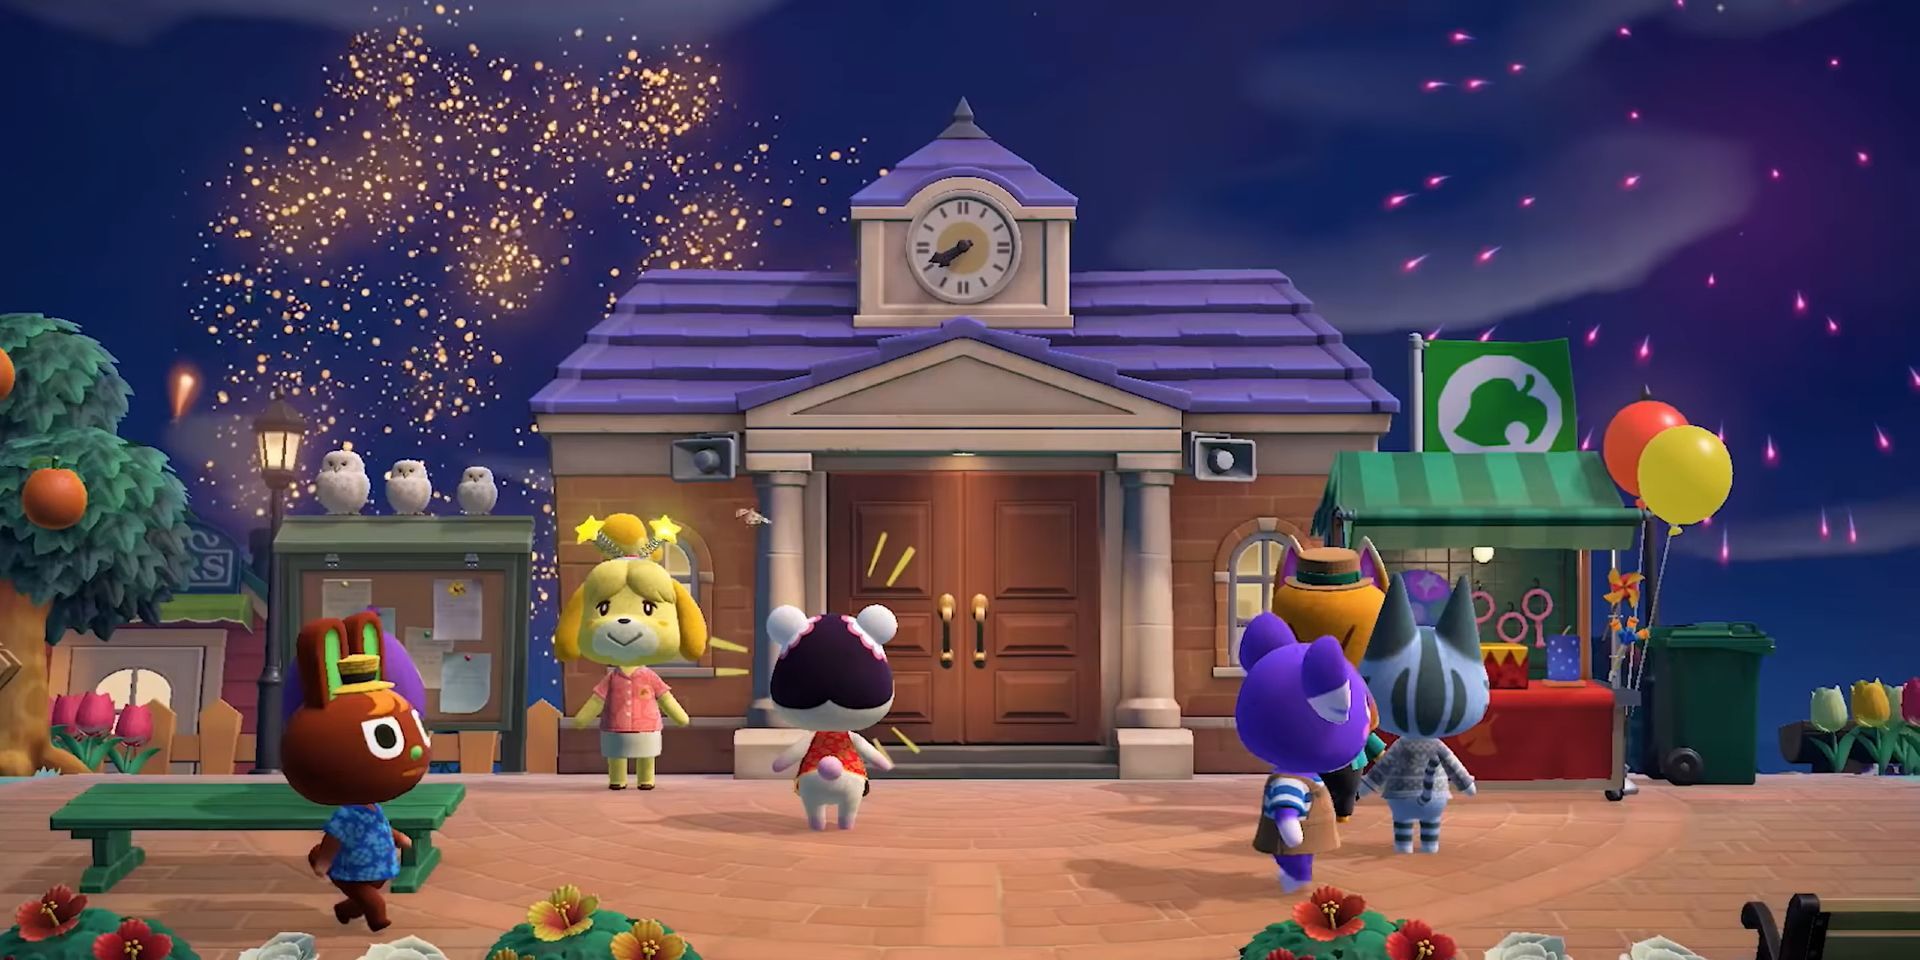 A screenshot from Animal Crossing: New Horizons showing a large group of villagers celebrating outside the Town Hall at night. Distant fireworks can be seen.